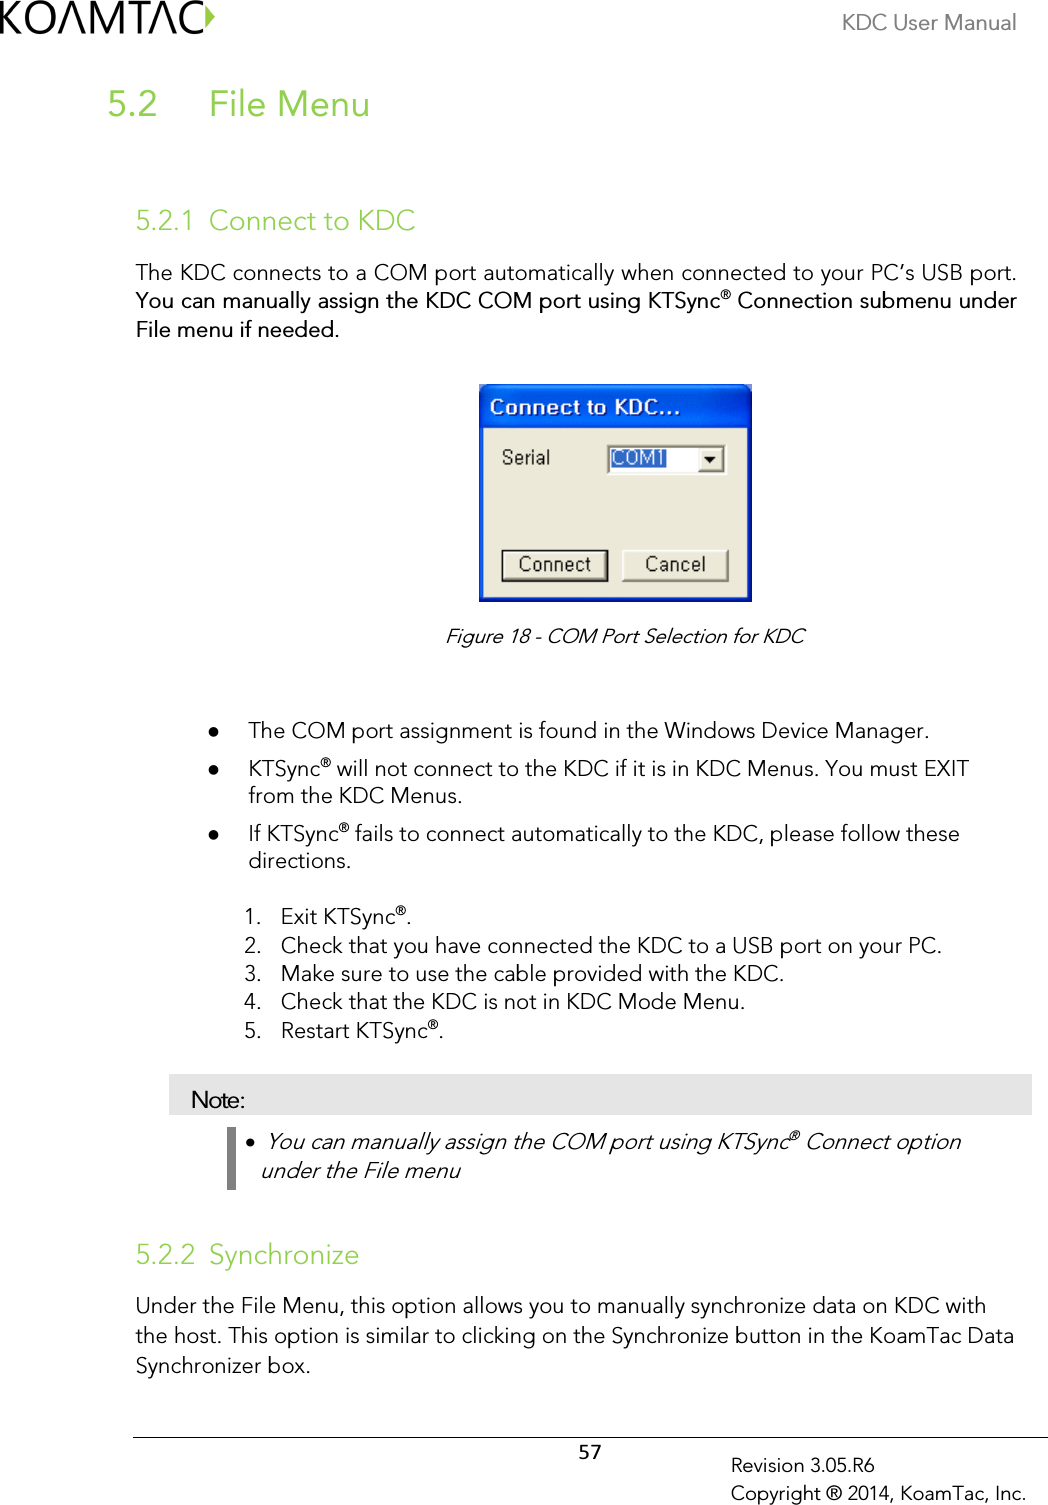 KDC User Manual  57 Revision 3.05.R6 Copyright ® 2014, KoamTac, Inc.  File Menu  5.2  5.2.1 Connect to KDC The KDC connects to a COM port automatically when connected to your PC’s USB port. You can manually assign the KDC COM port using KTSync® Connection submenu under File menu if needed.           The COM port assignment is found in the Windows Device Manager.  KTSync® will not connect to the KDC if it is in KDC Menus. You must EXIT from the KDC Menus.  If KTSync® fails to connect automatically to the KDC, please follow these directions. 1. Exit KTSync®. 2. Check that you have connected the KDC to a USB port on your PC. 3. Make sure to use the cable provided with the KDC.   4. Check that the KDC is not in KDC Mode Menu.   5. Restart KTSync®. Note: •  You can manually assign the COM port using KTSync® Connect option under the File menu  5.2.2 Synchronize Under the File Menu, this option allows you to manually synchronize data on KDC with the host. This option is similar to clicking on the Synchronize button in the KoamTac Data Synchronizer box. Figure 18 - COM Port Selection for KDC 